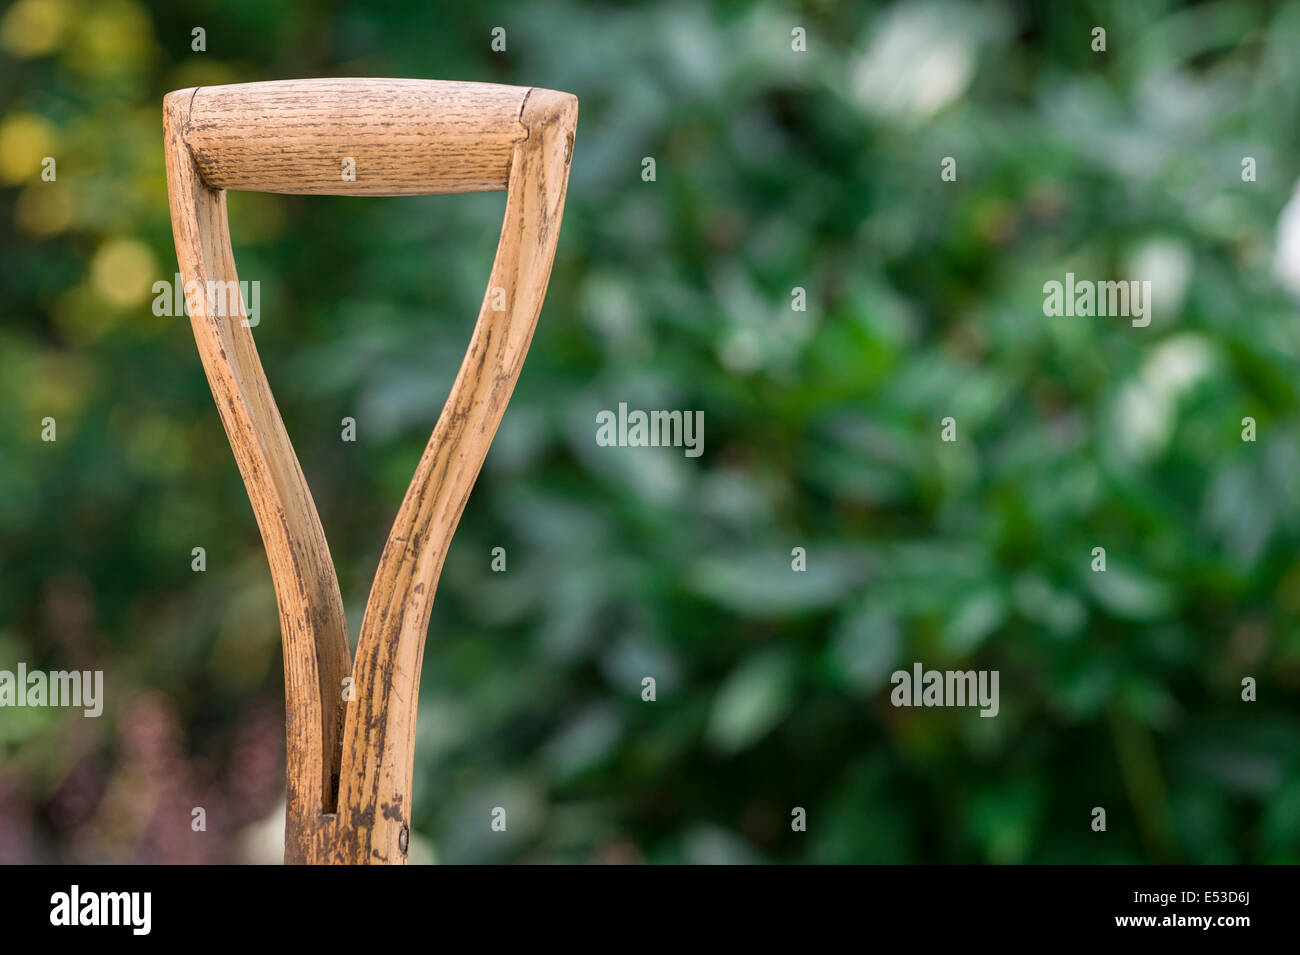 Close up of old, well used wooden handle, belonging to a garden spade. Stock Photo